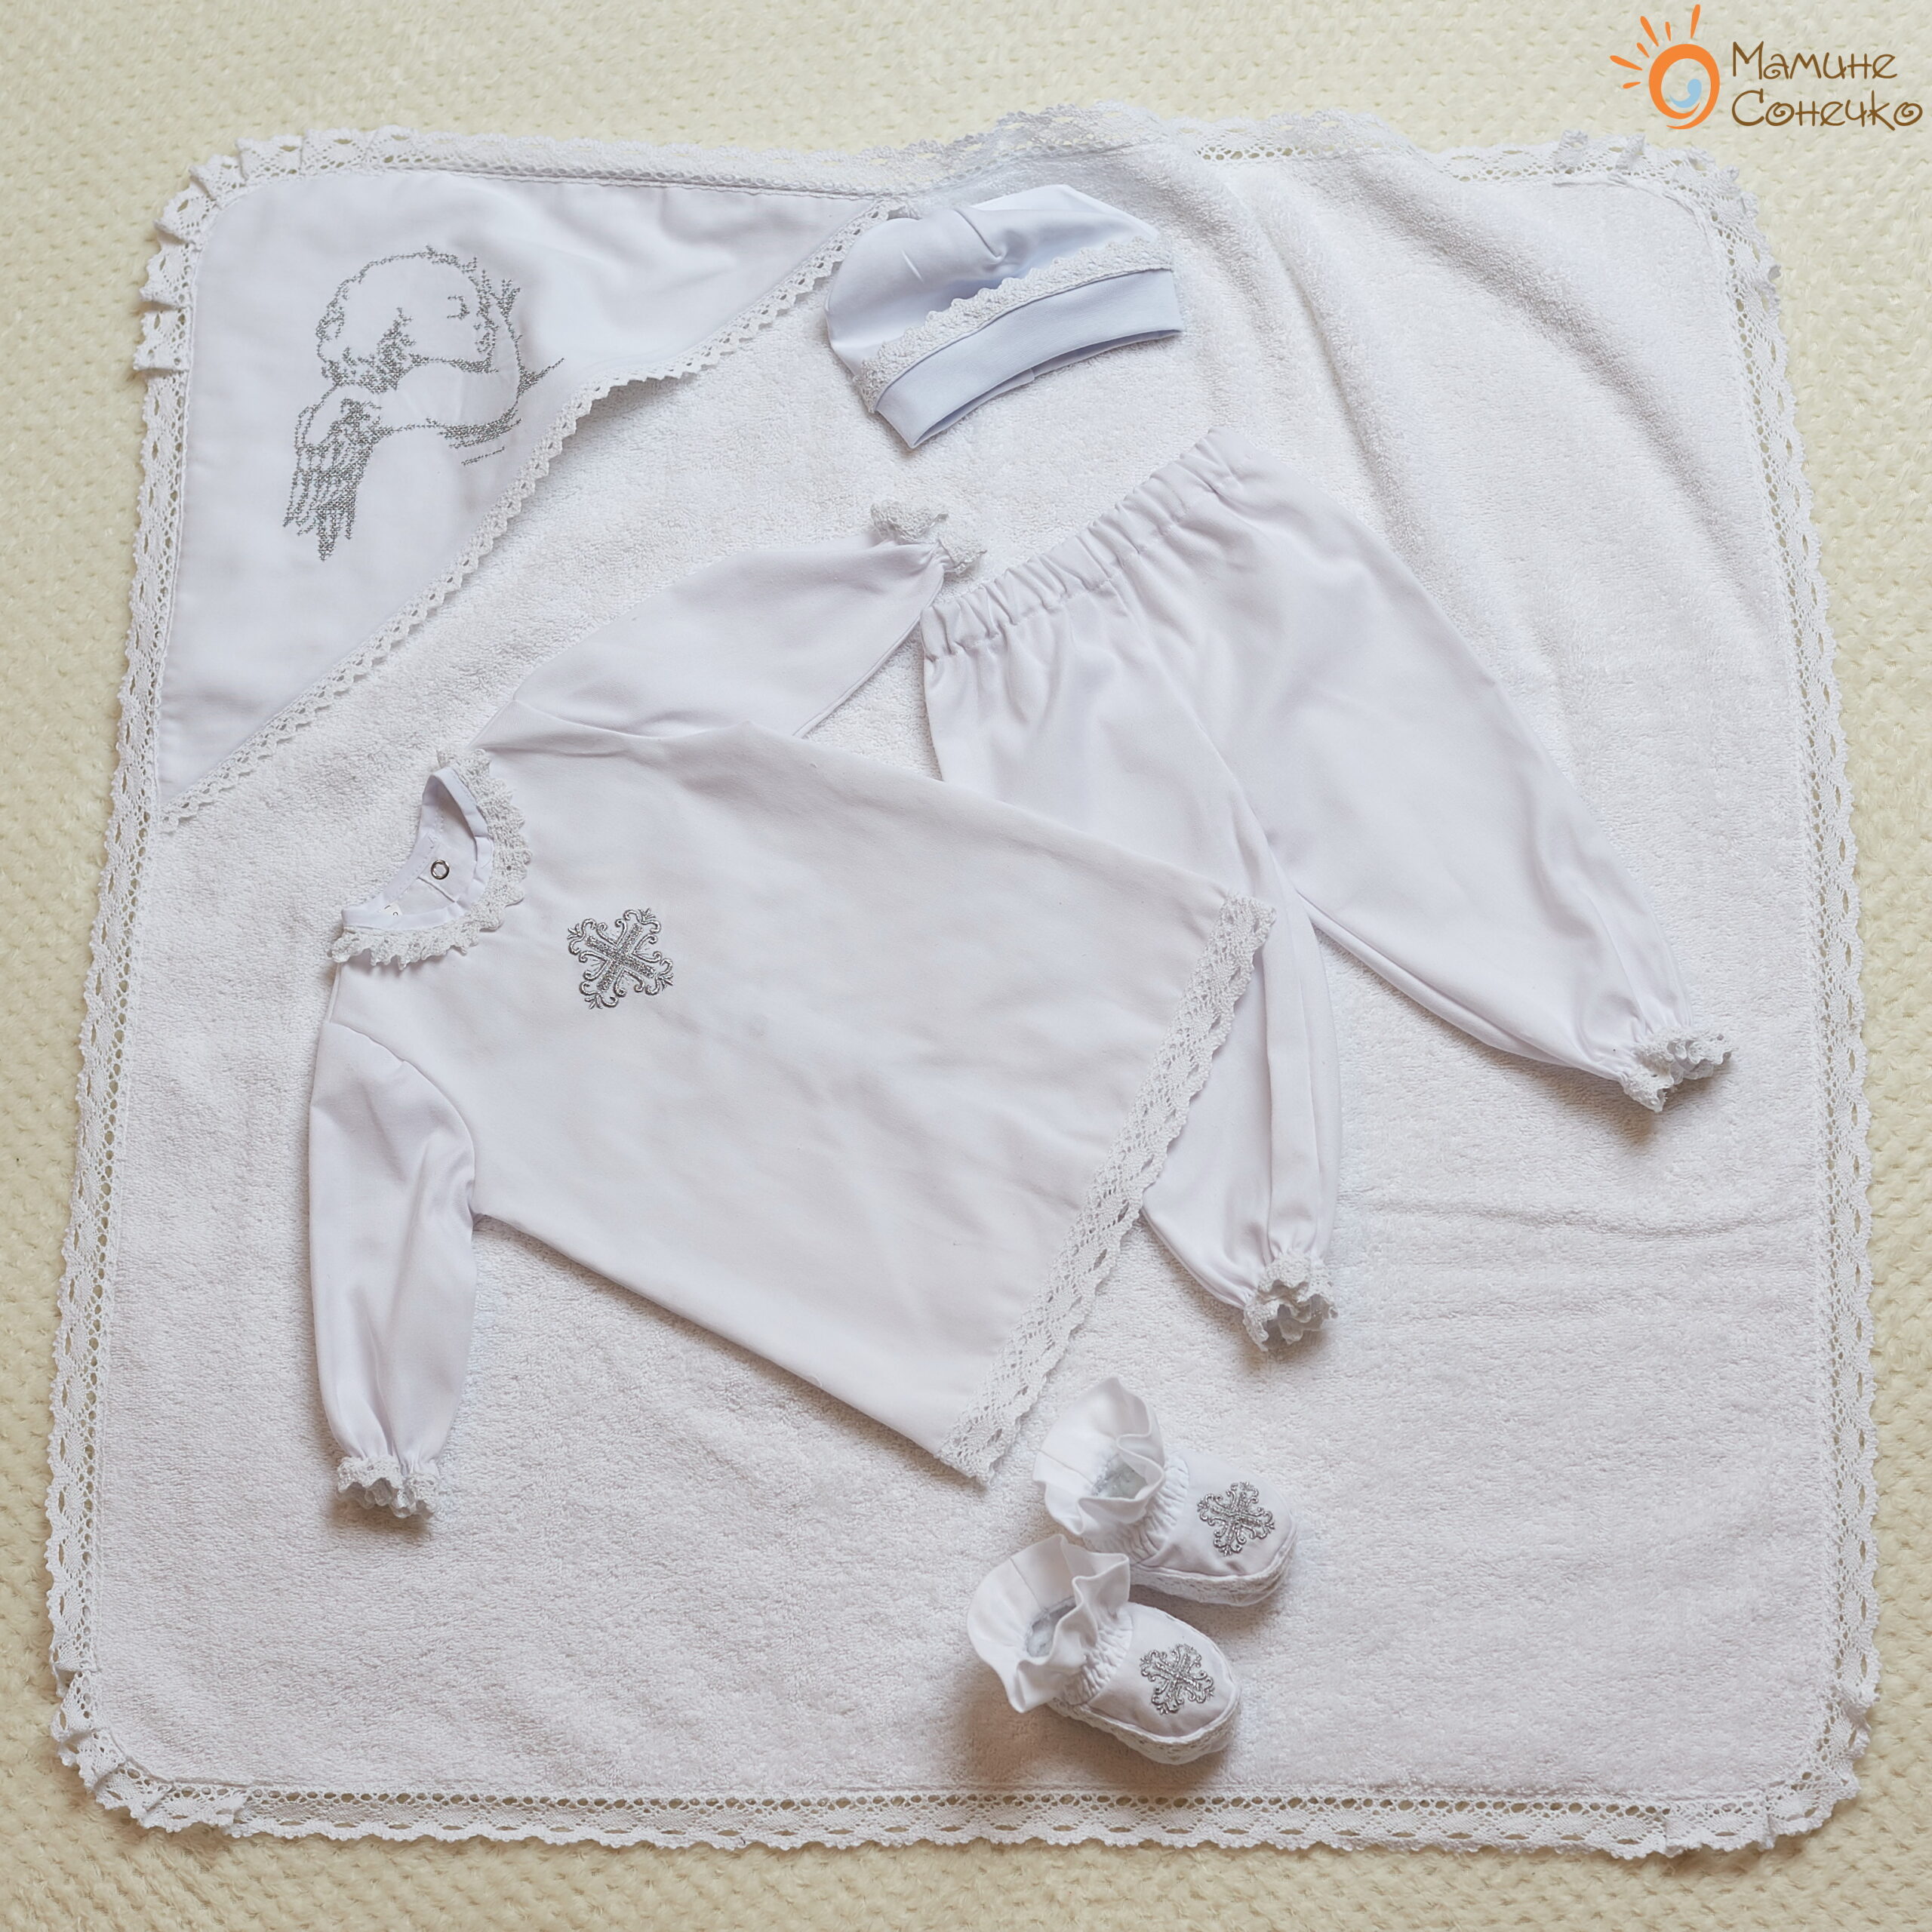 Complete set for baptism of a boy “Silver cross”, linen